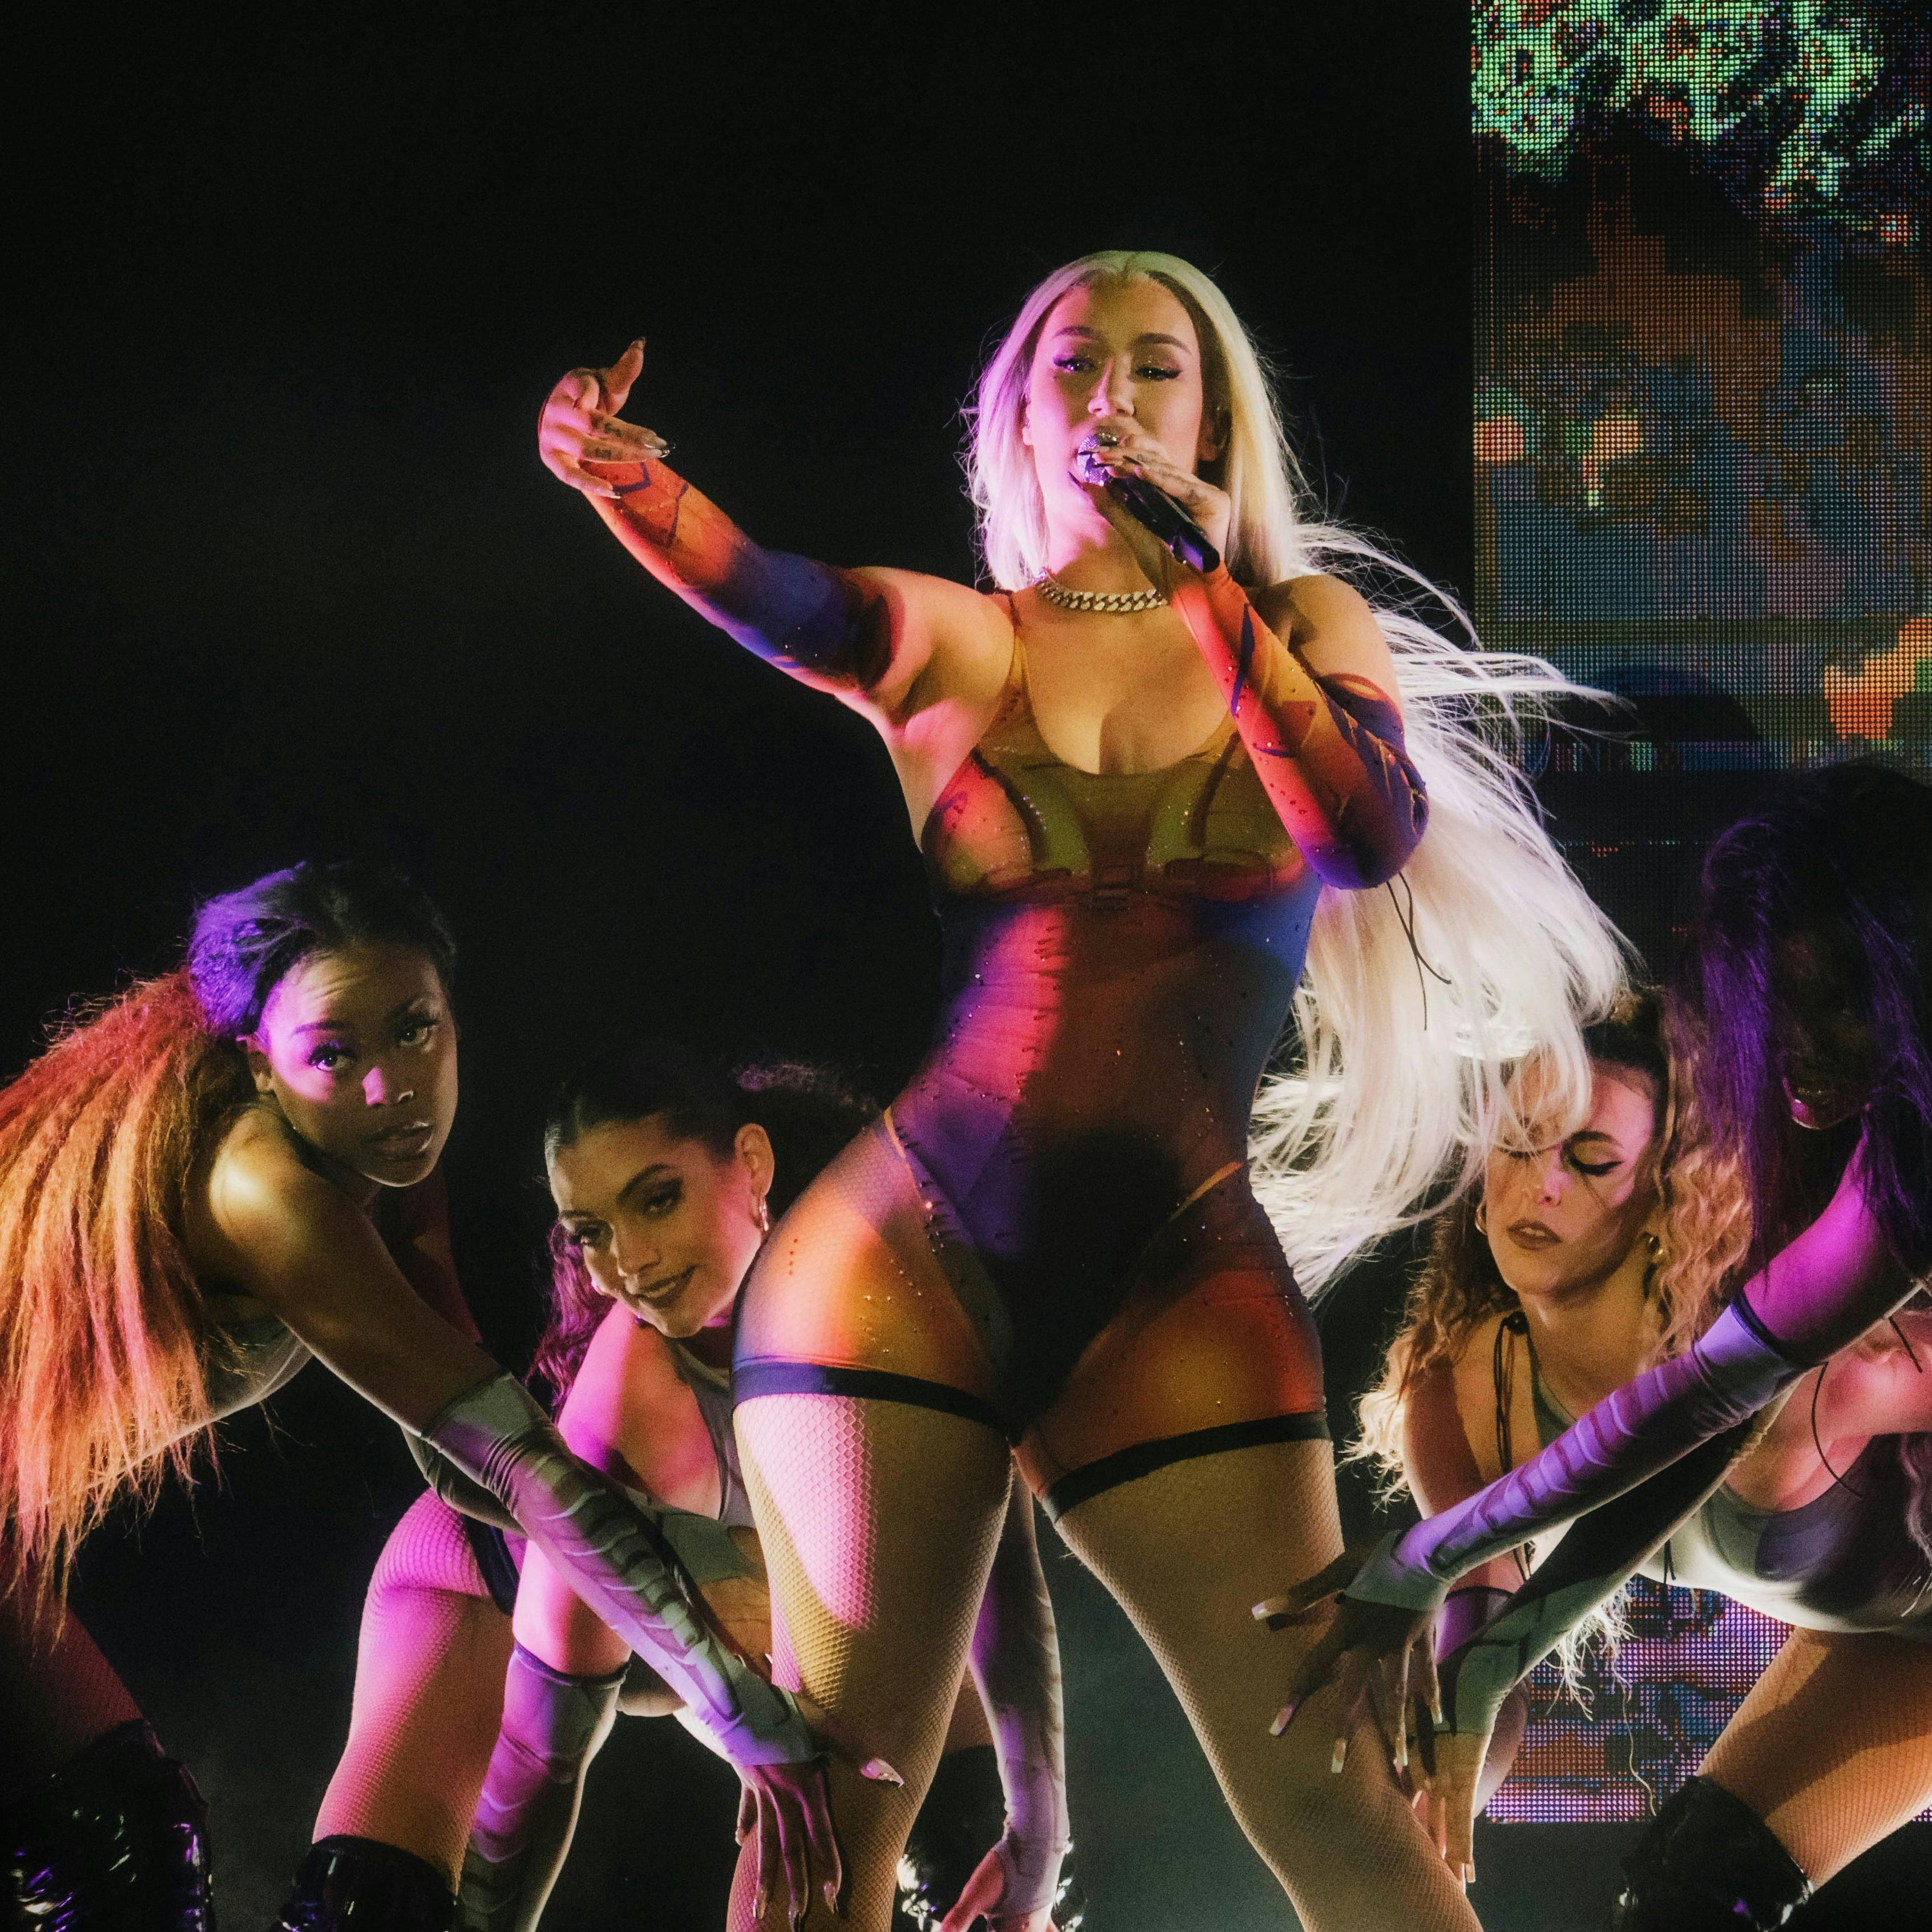 Iggy Azalea performs at Smoothie King Center in New Orleans, Louisiana on Thursday, October 6th, 2022